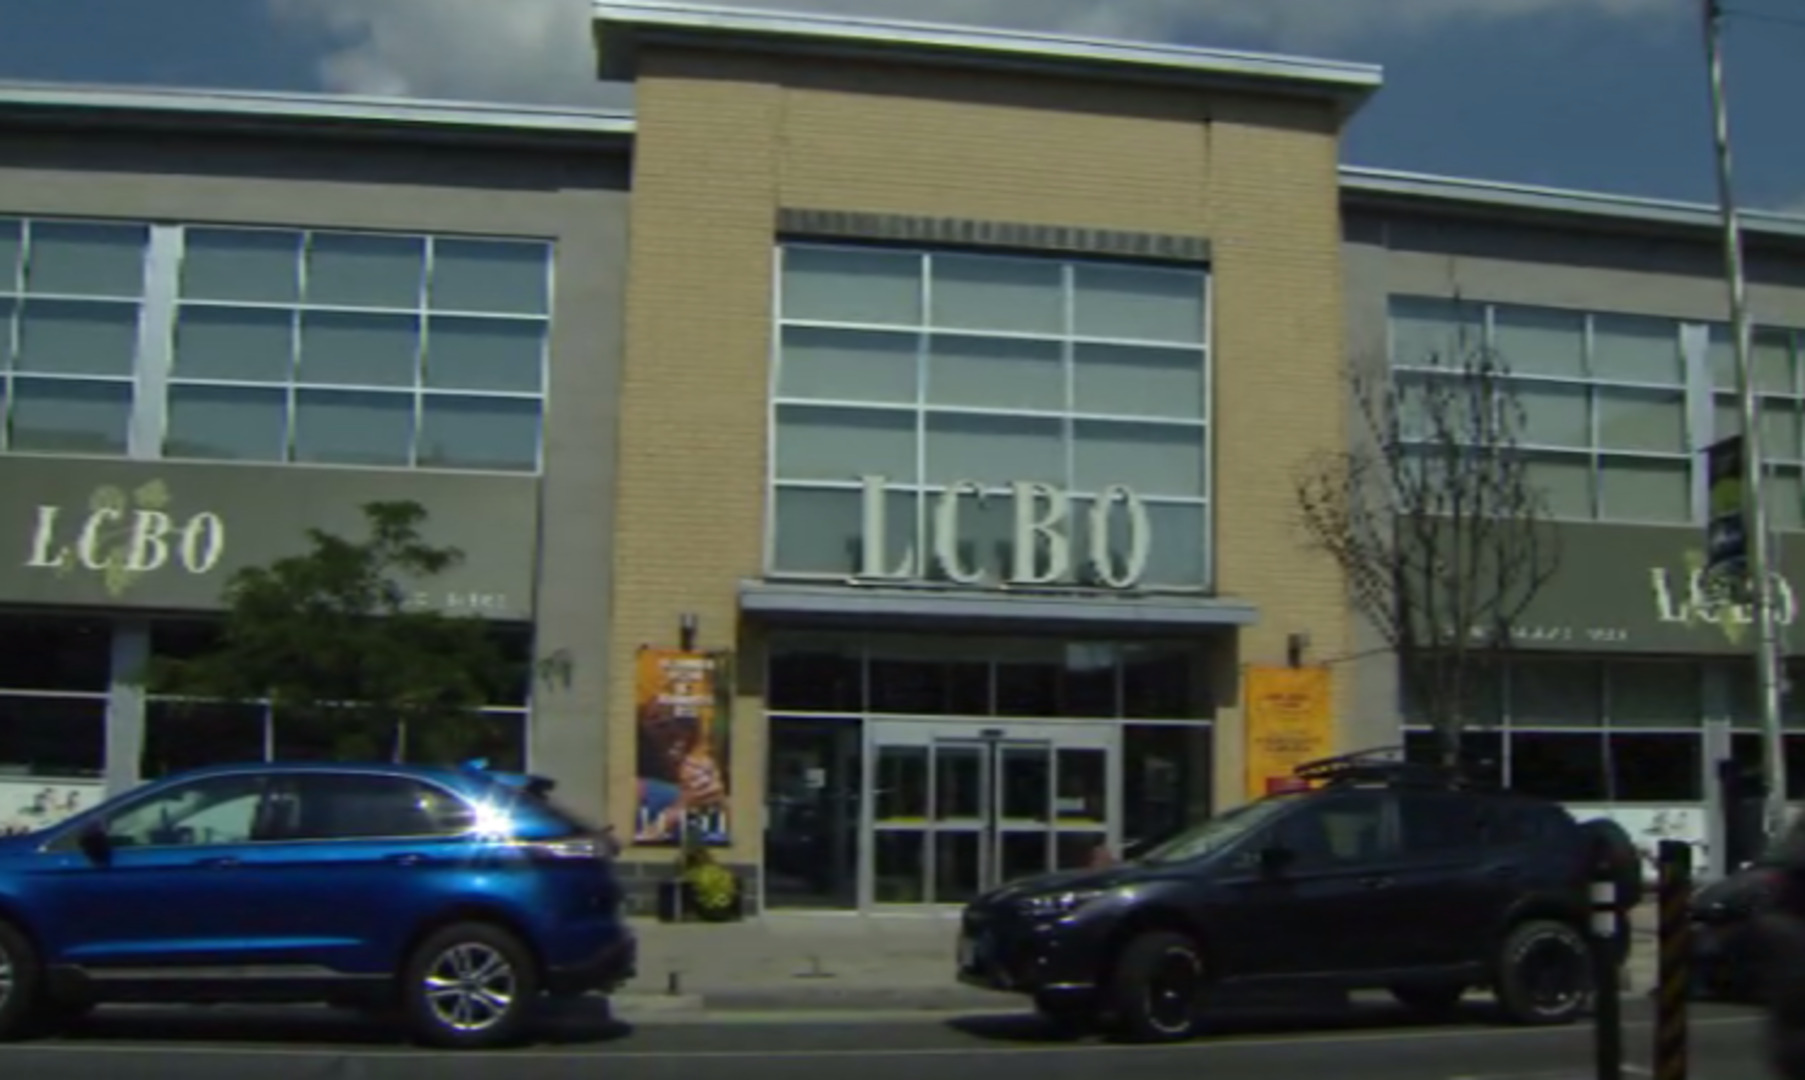 LCBO stores will be closed for two weeks if workers strike